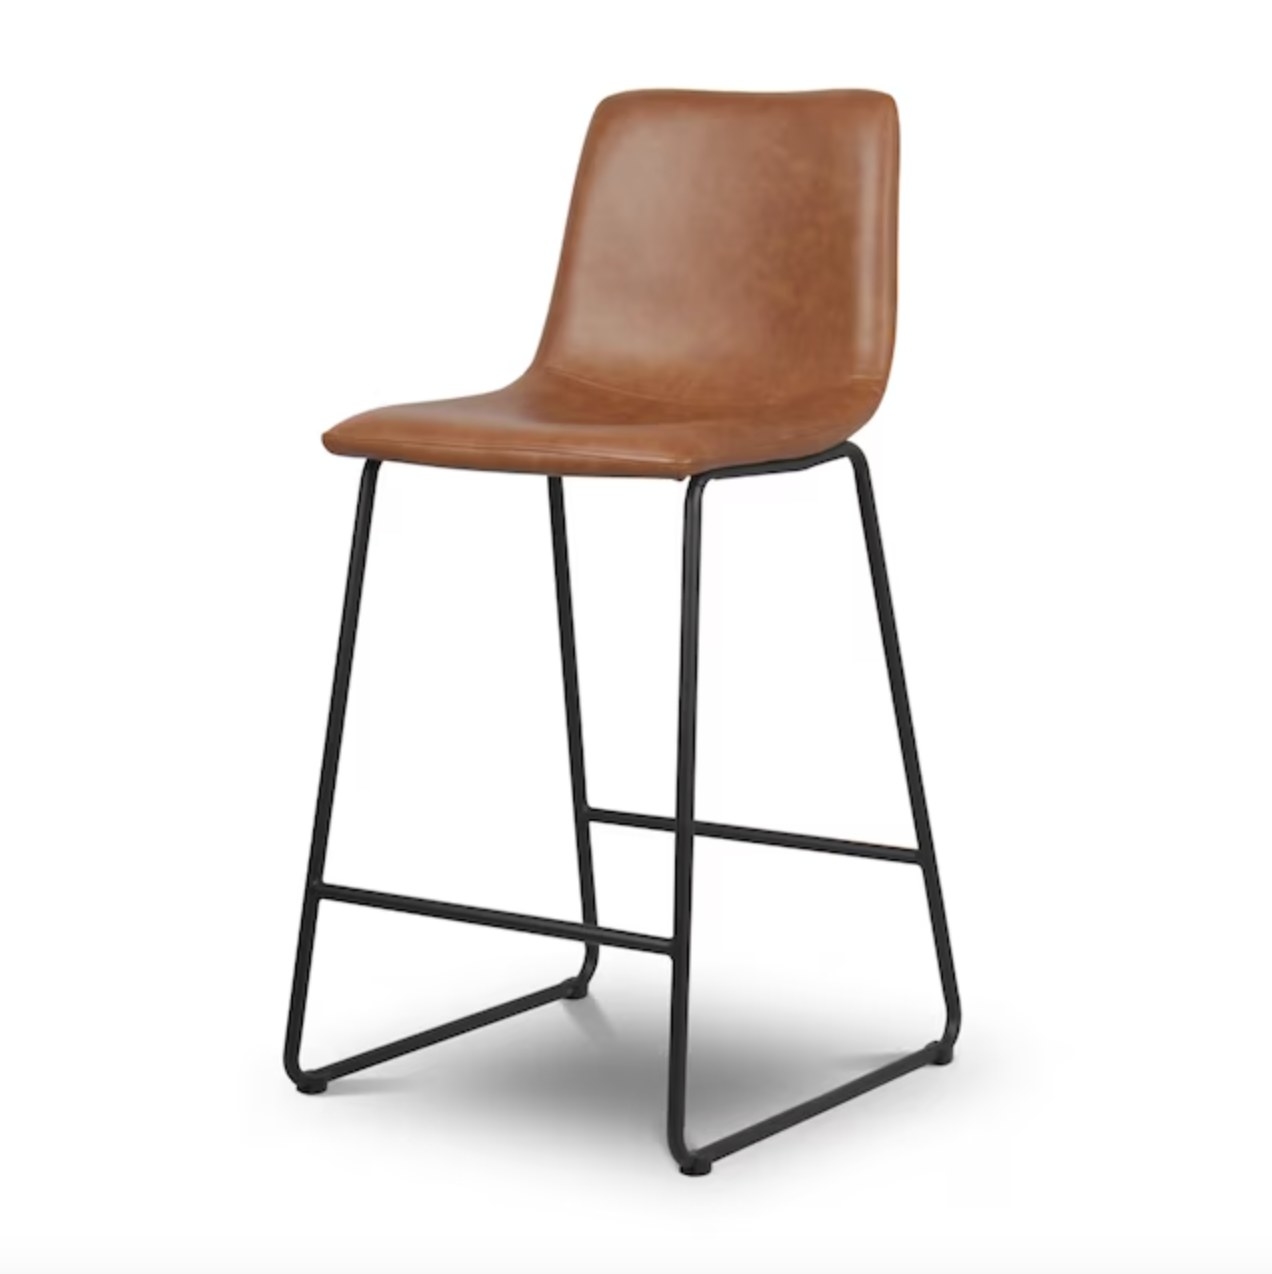 the medium brown faux-leather seat with long dark legs